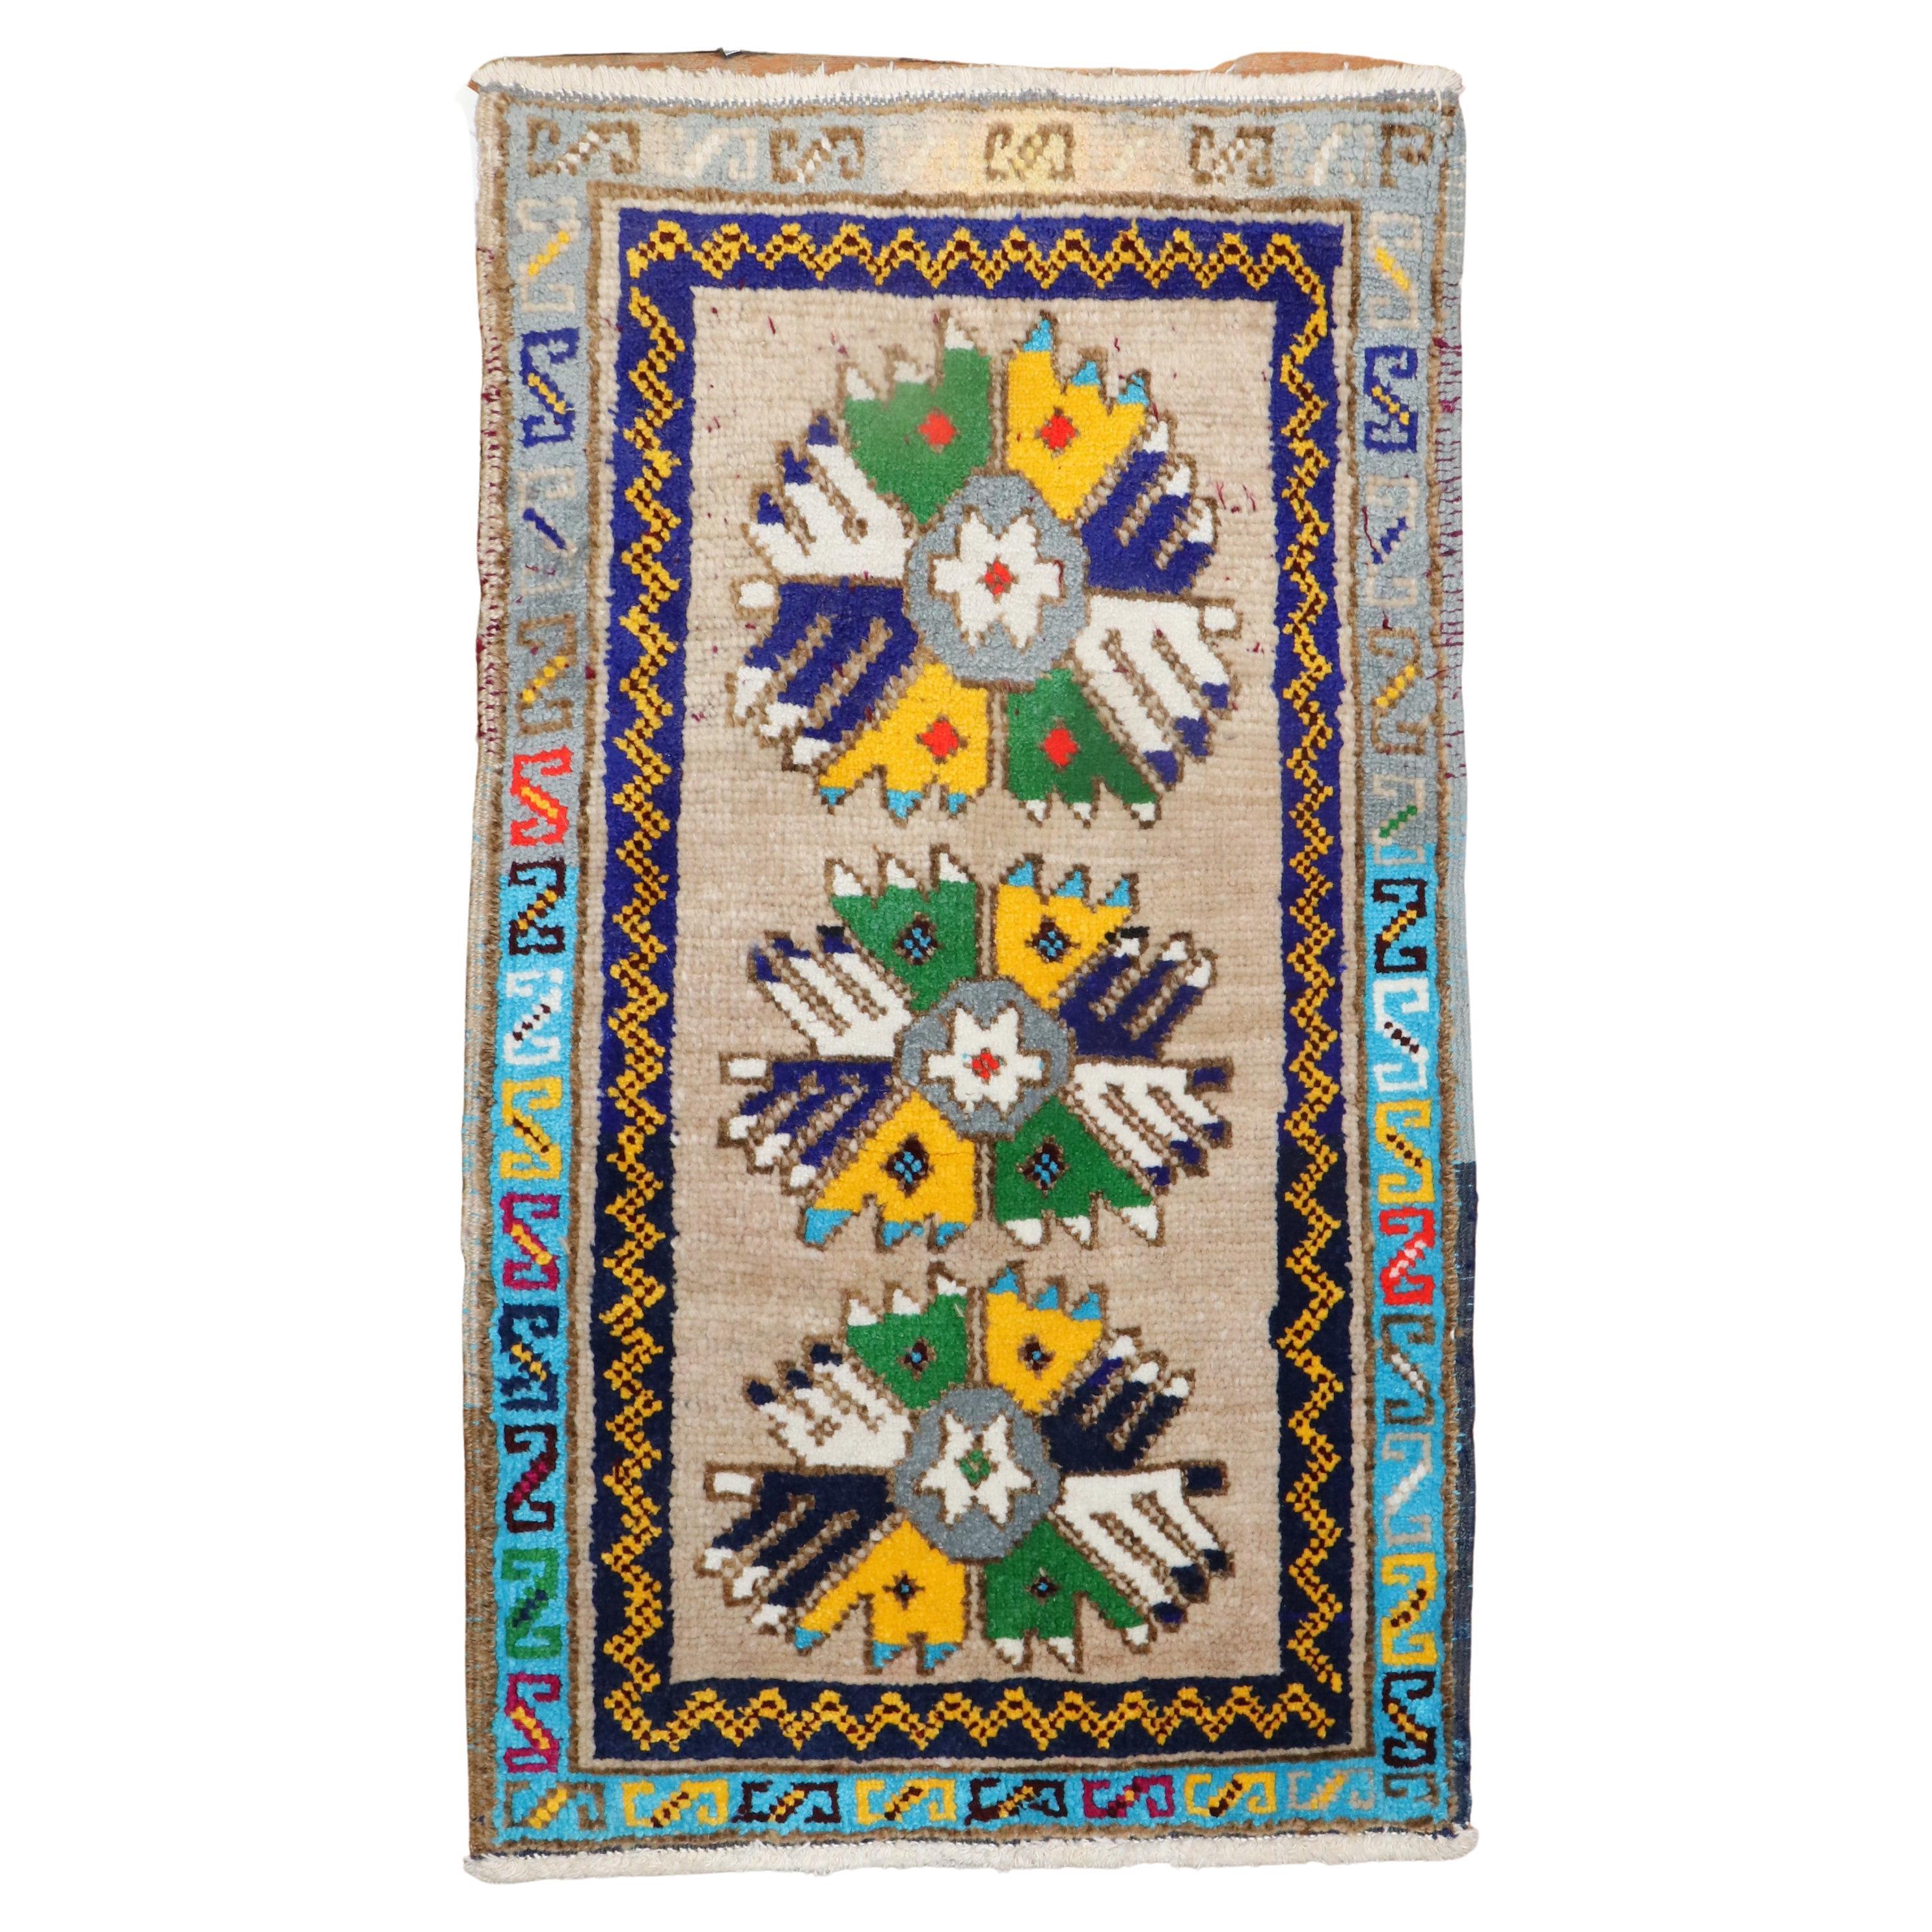 Mid 20th century quirky Turkish Anatolian Rug

Measures: 1'5'' x 2'5''.